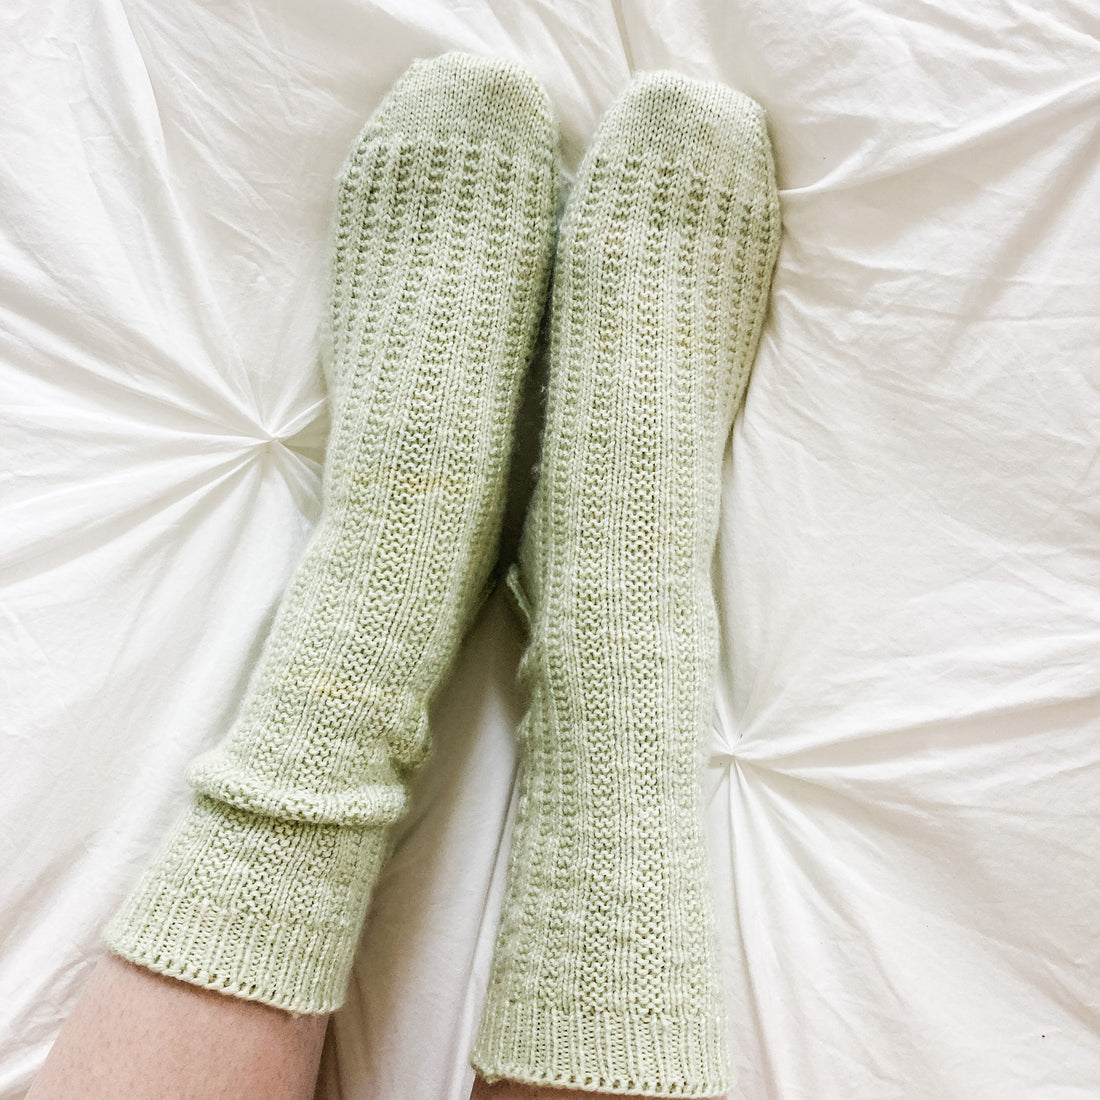 For the Love of Hand-Knit Socks